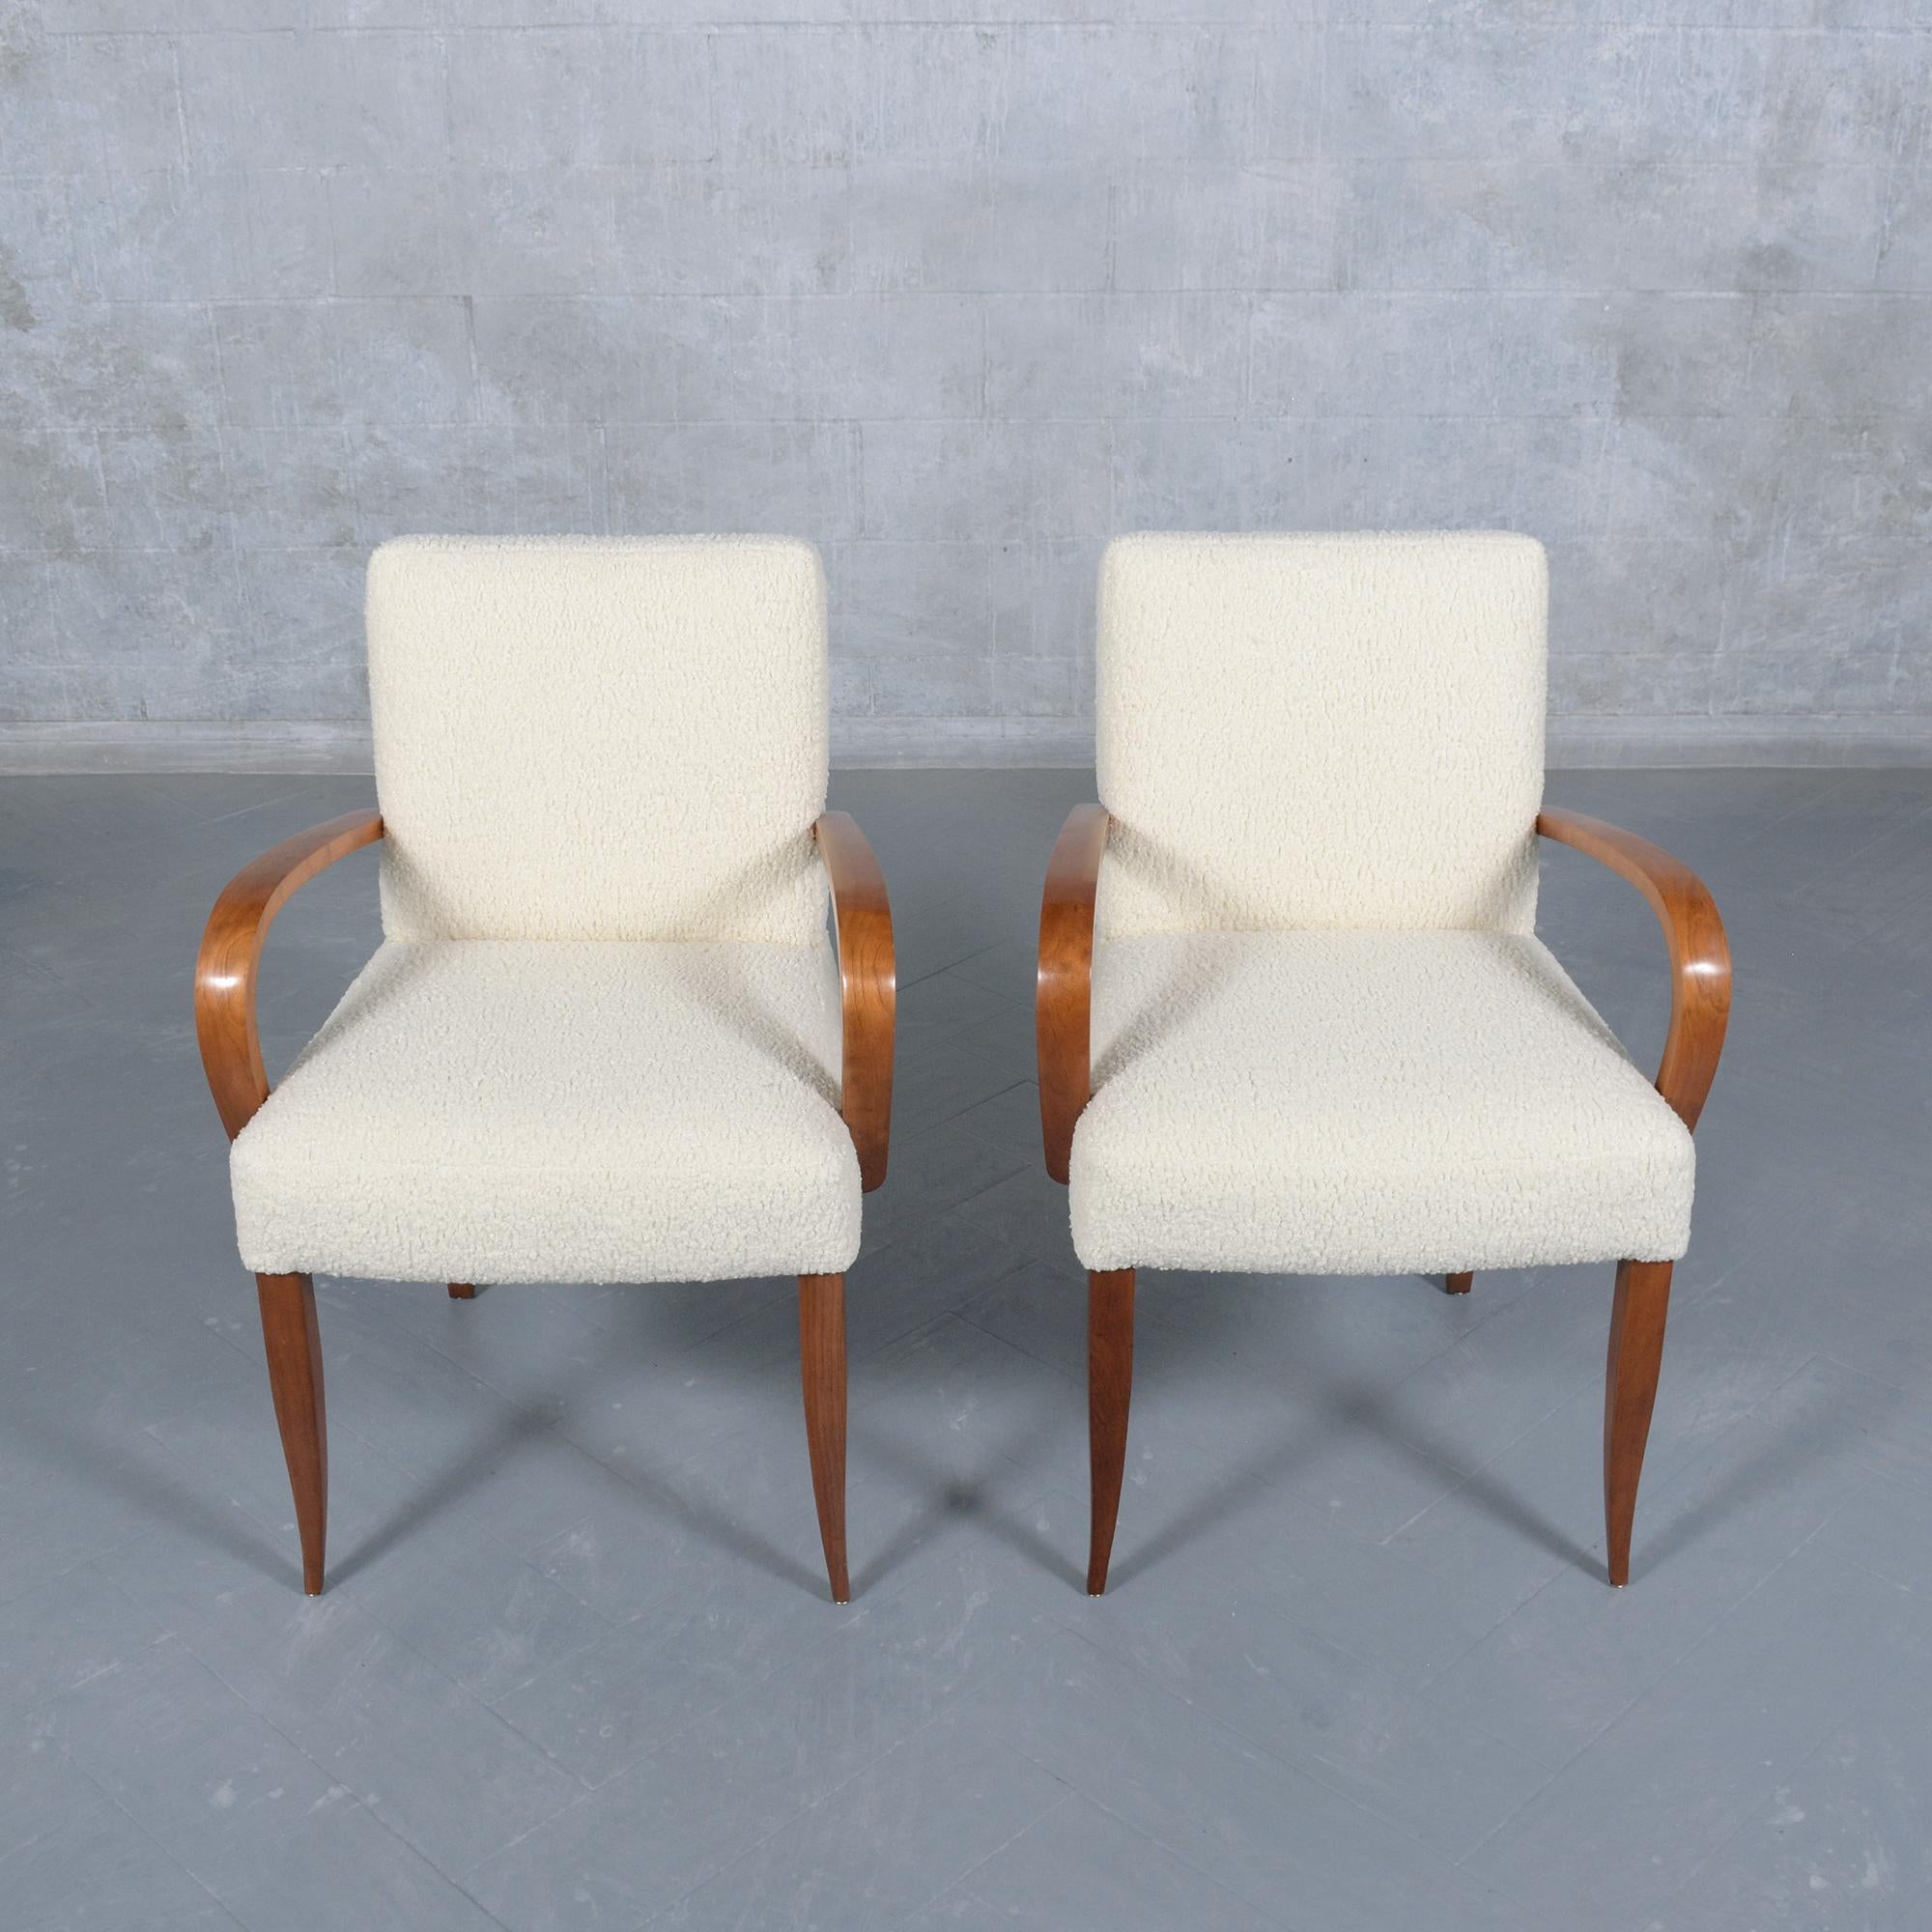 Carved Set of 6 Mid-Century Modern Walnut Armchairs: Restored Elegance For Sale